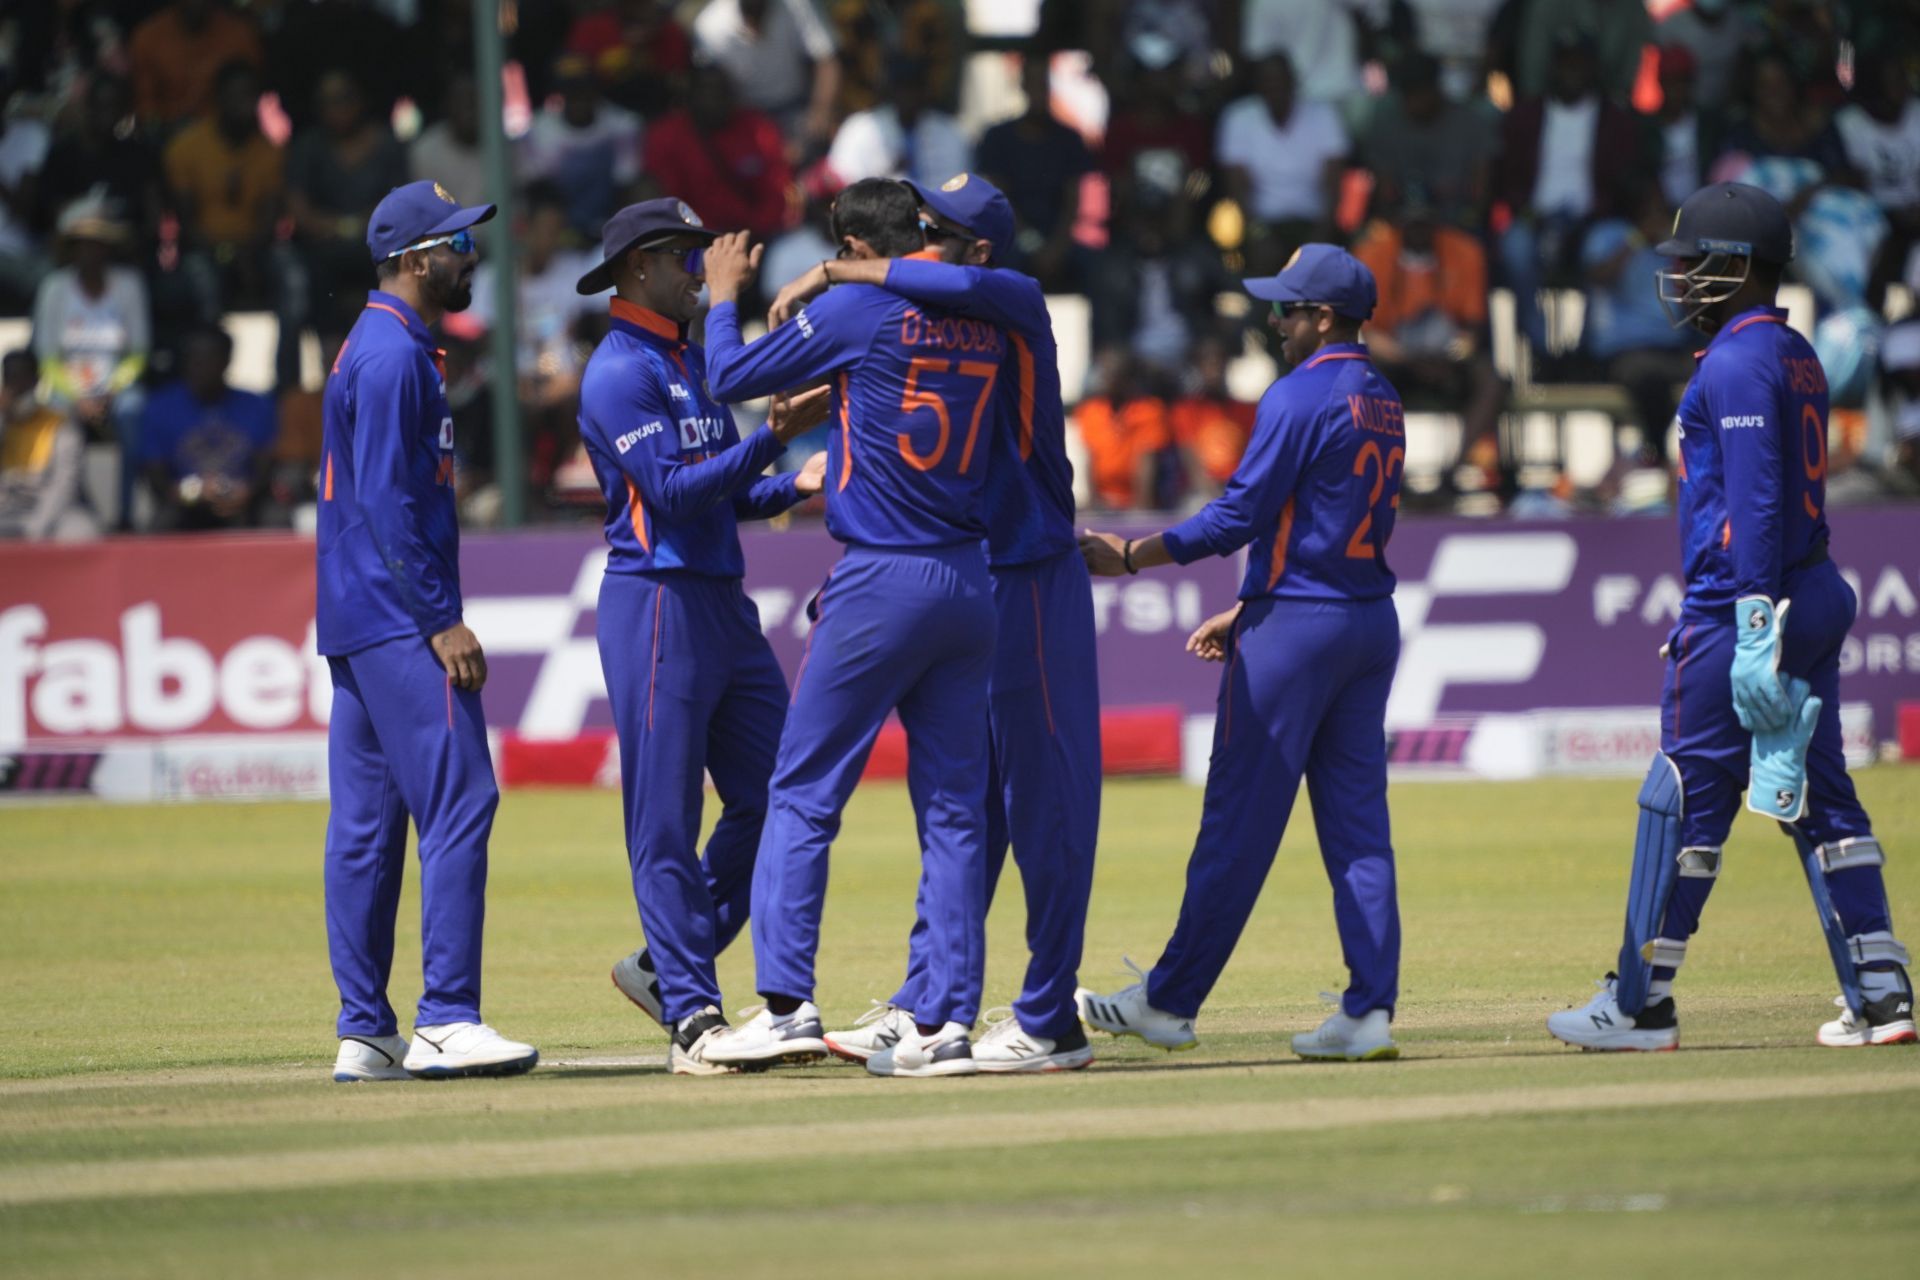 Team India have already sealed the series ahead of the 3rd ODI against Zimbabwe